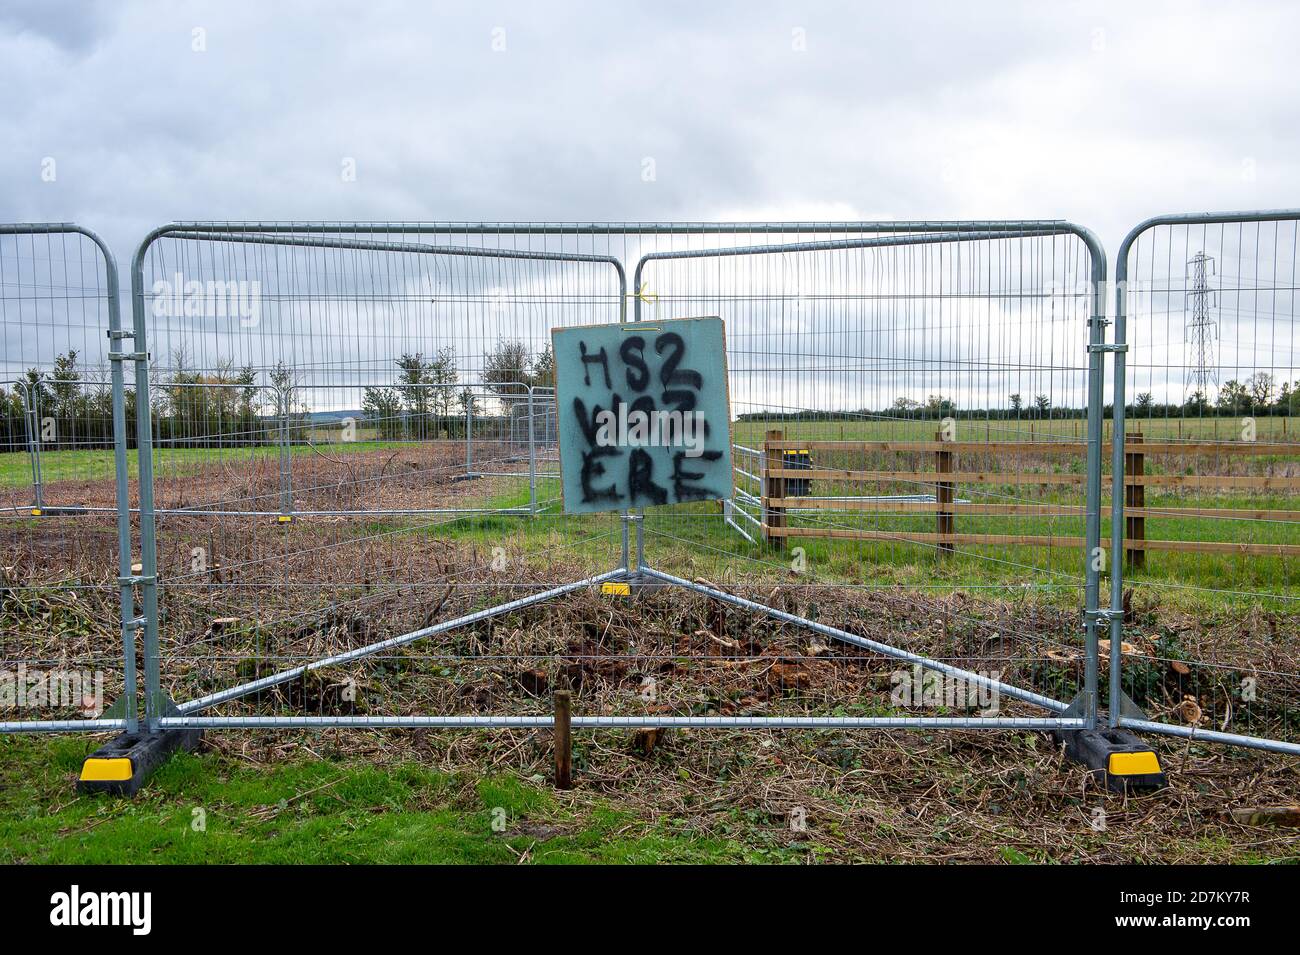 Stoke Mandeville, Buckinghamshire, UK. 23rd October 2020. Fusion JV contractors working on behalf of HS2 on the High Speed Rail link, have cut down a hedgerow at the Bucks Goat Centre allegedly trespassing on their land and without prior permission or consultation. HS2 did this signs now hang on the HS2 high security fences on the perimeter of the Goat Centre. A temporary haul road is being built for the construction of the controversial and hugely over budget High Speed Rail from London to Birmingham which will pass through Stoke Mandeville. Credit: Maureen McLean/Alamy Live News Stock Photo